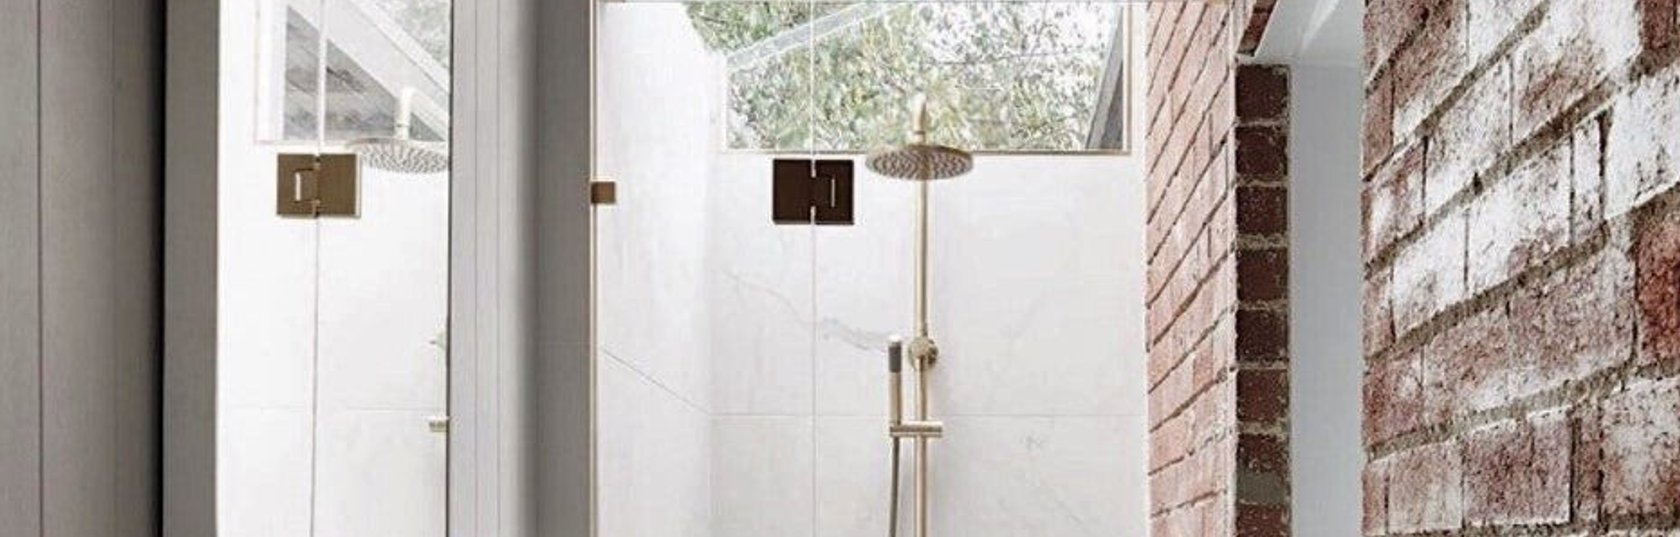 Walk-In Shower Dimensions, Costs, And Other FAQs